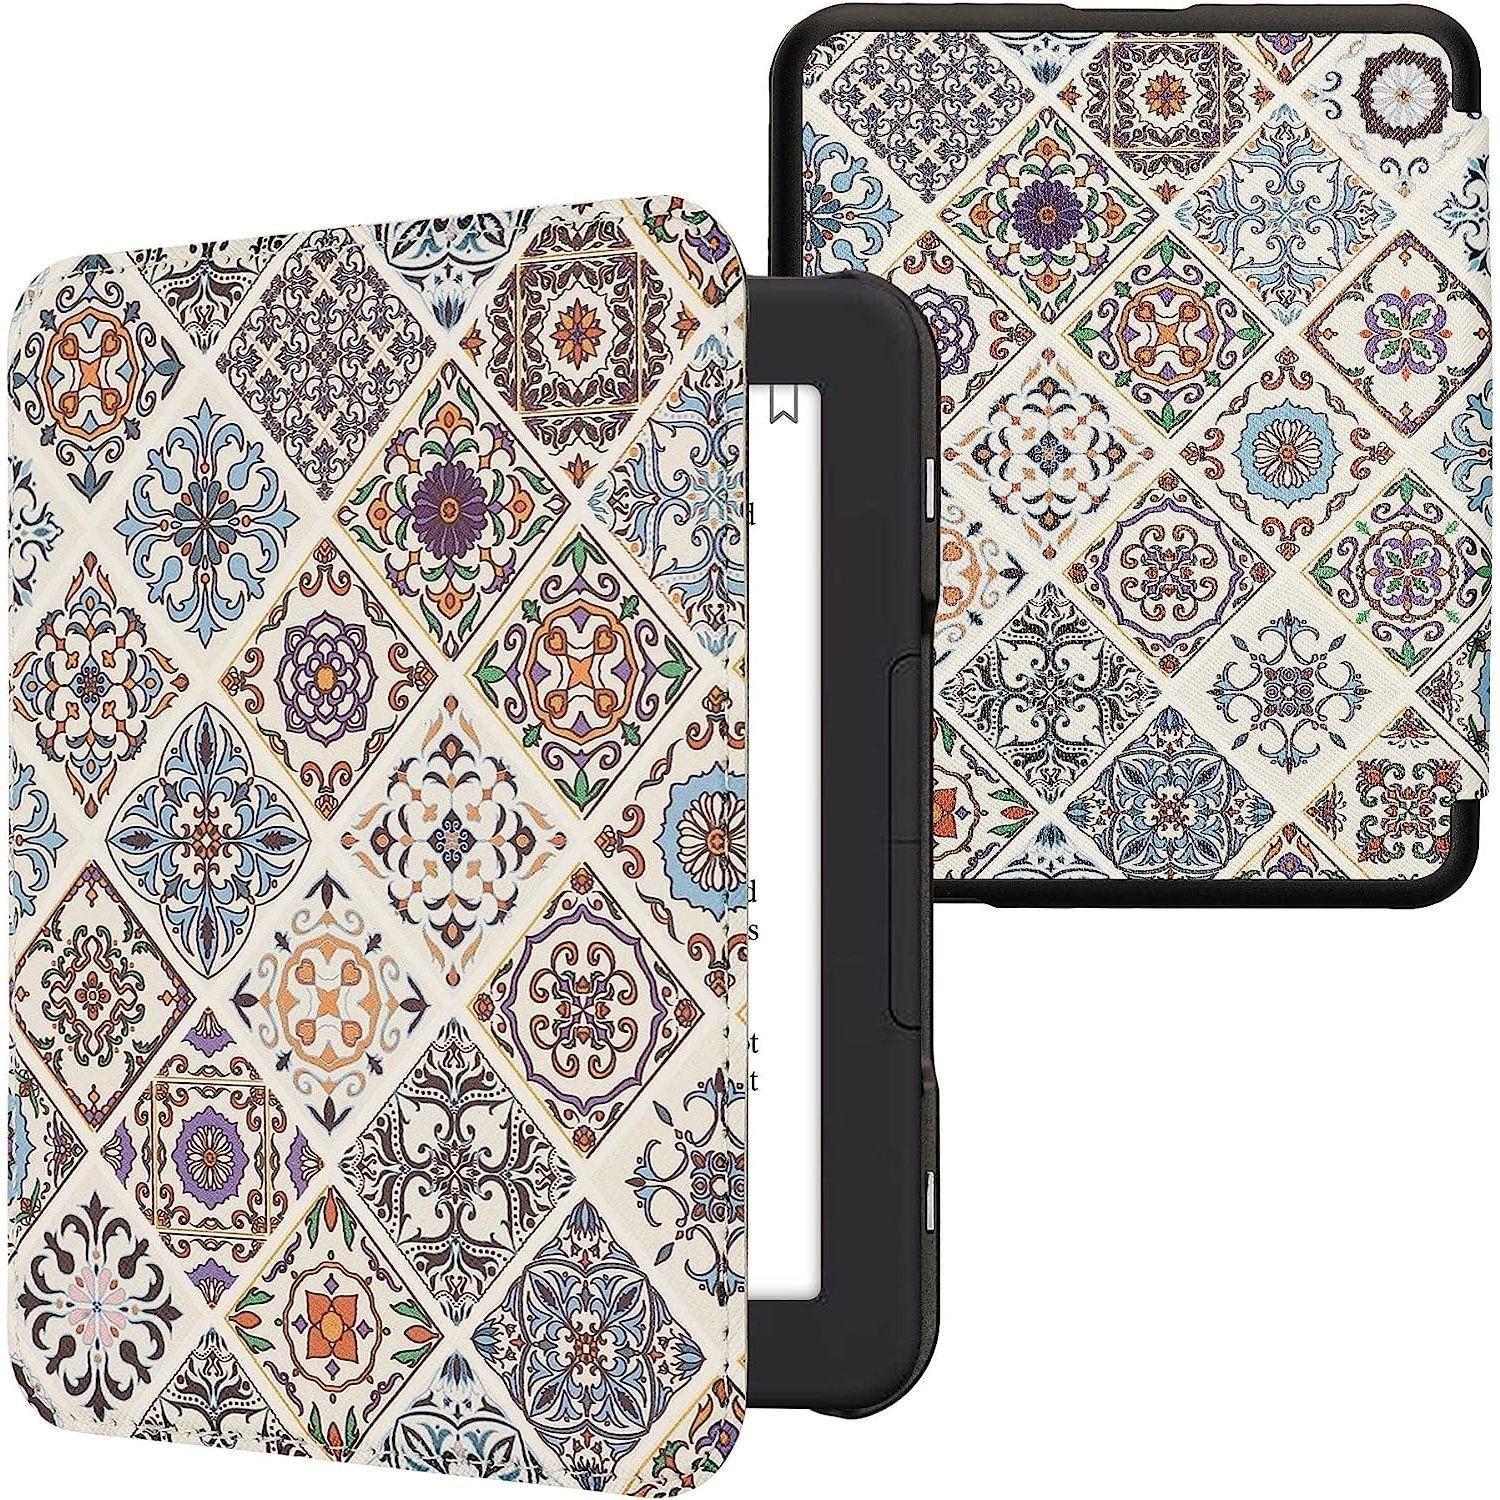 Mosaic-style kwmobile case for Nook GlowLight 4:4e on a white background